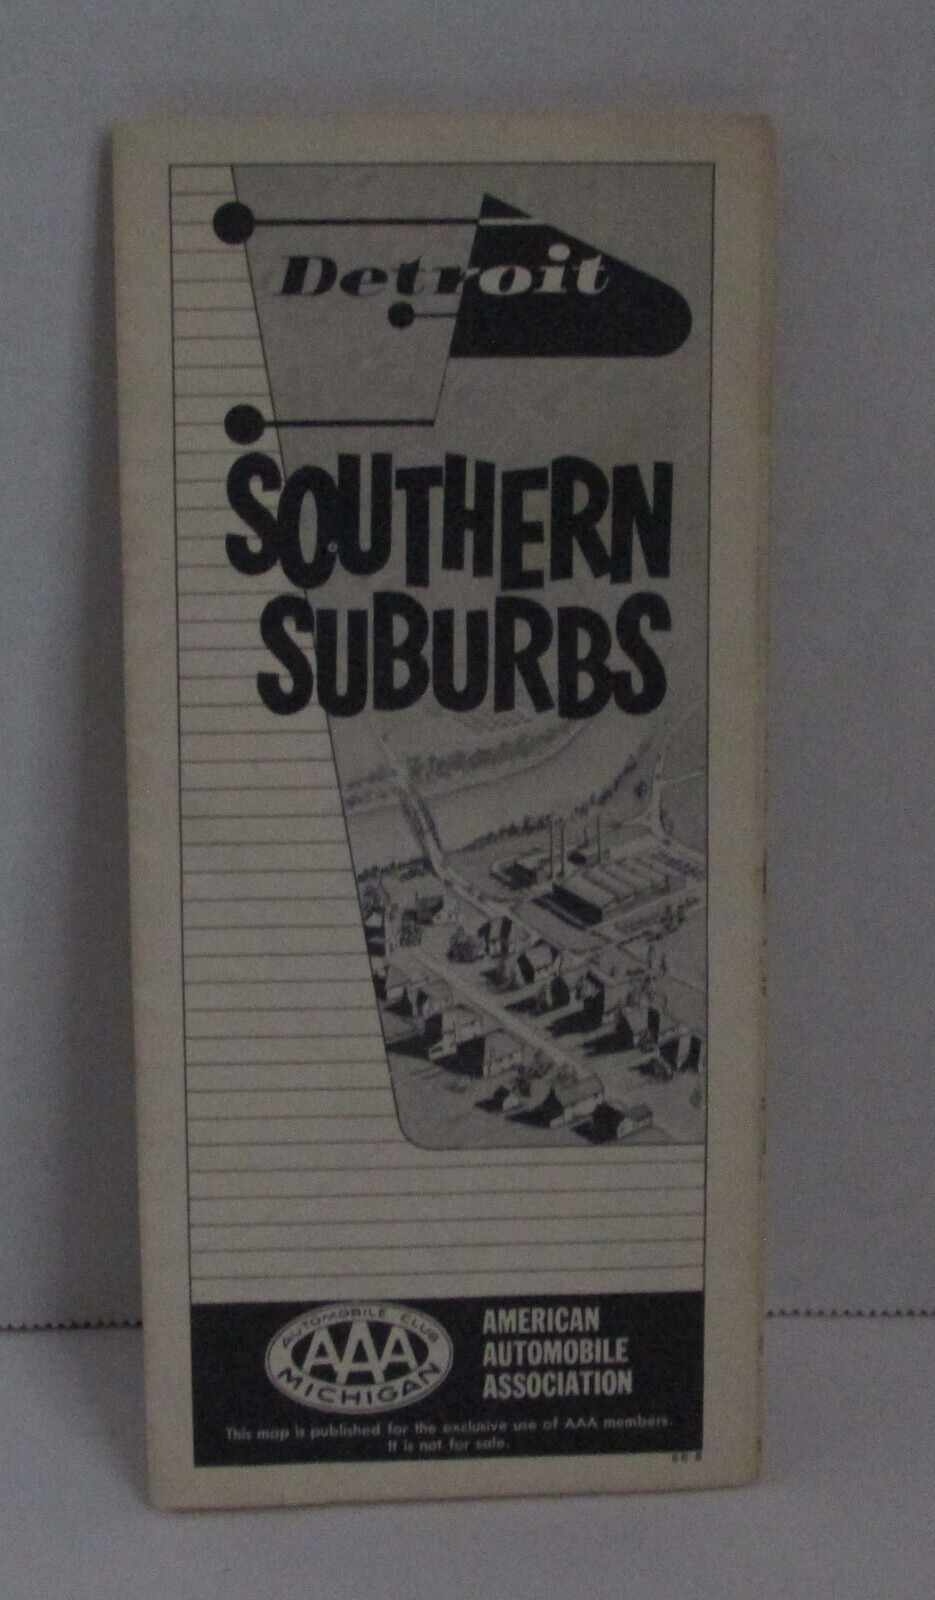 VINTAGE 1966 AAA Michigan Club Detroit Southern Suburbs City Map